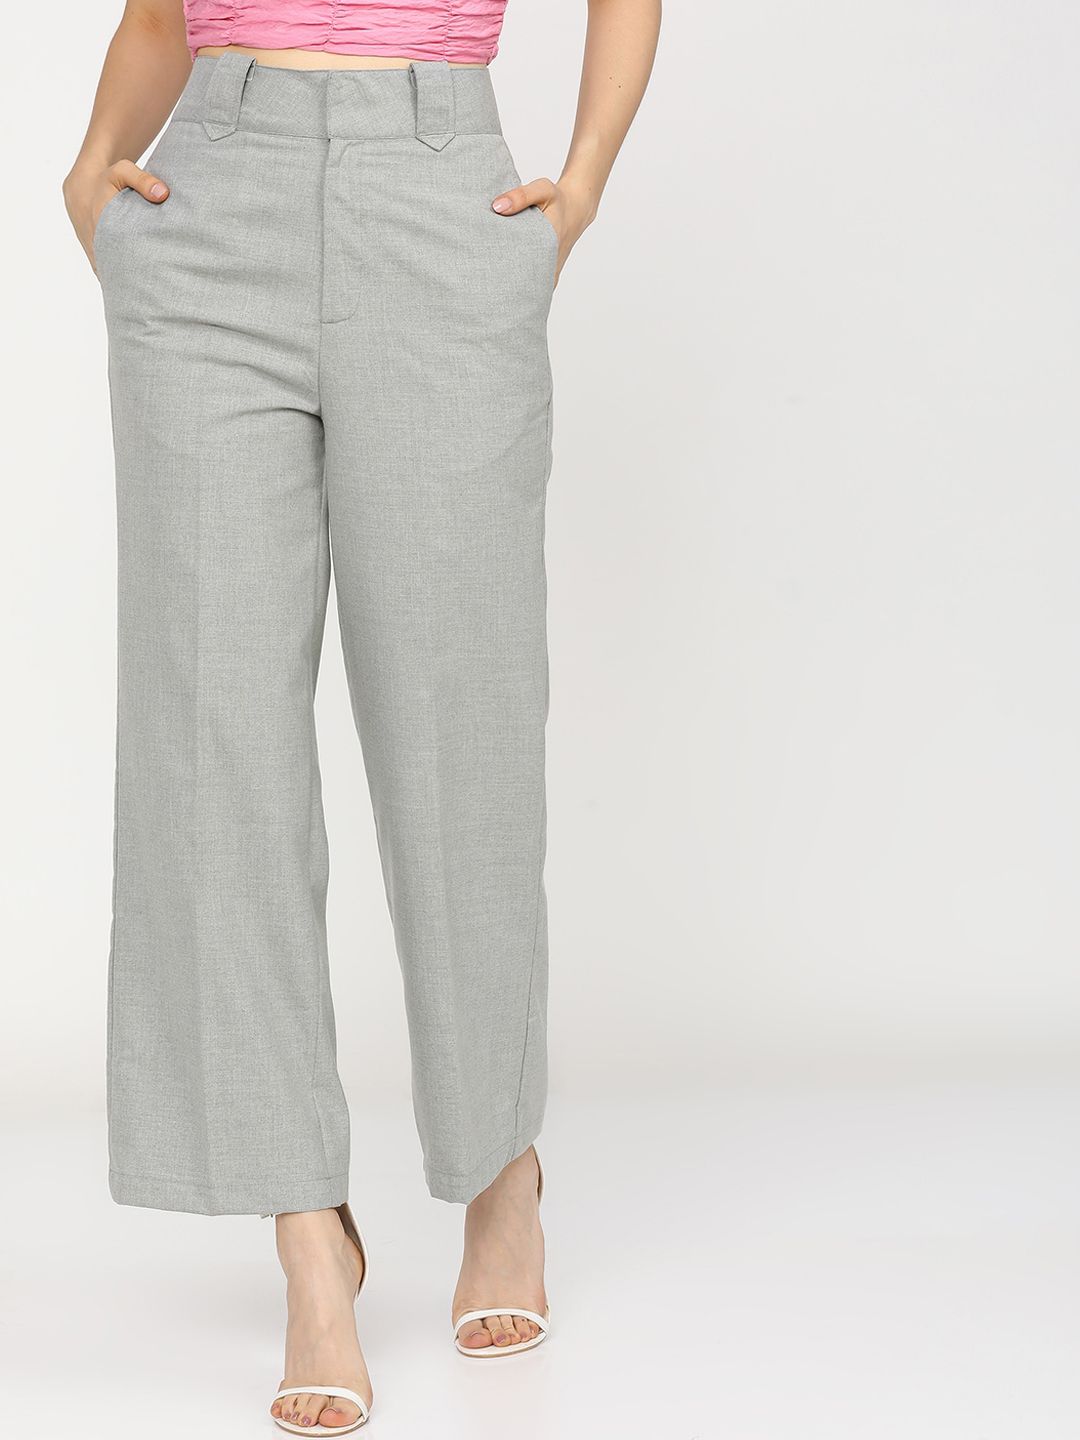 Tokyo Talkies Women Grey High-Rise Easy Wash Trousers Price in India